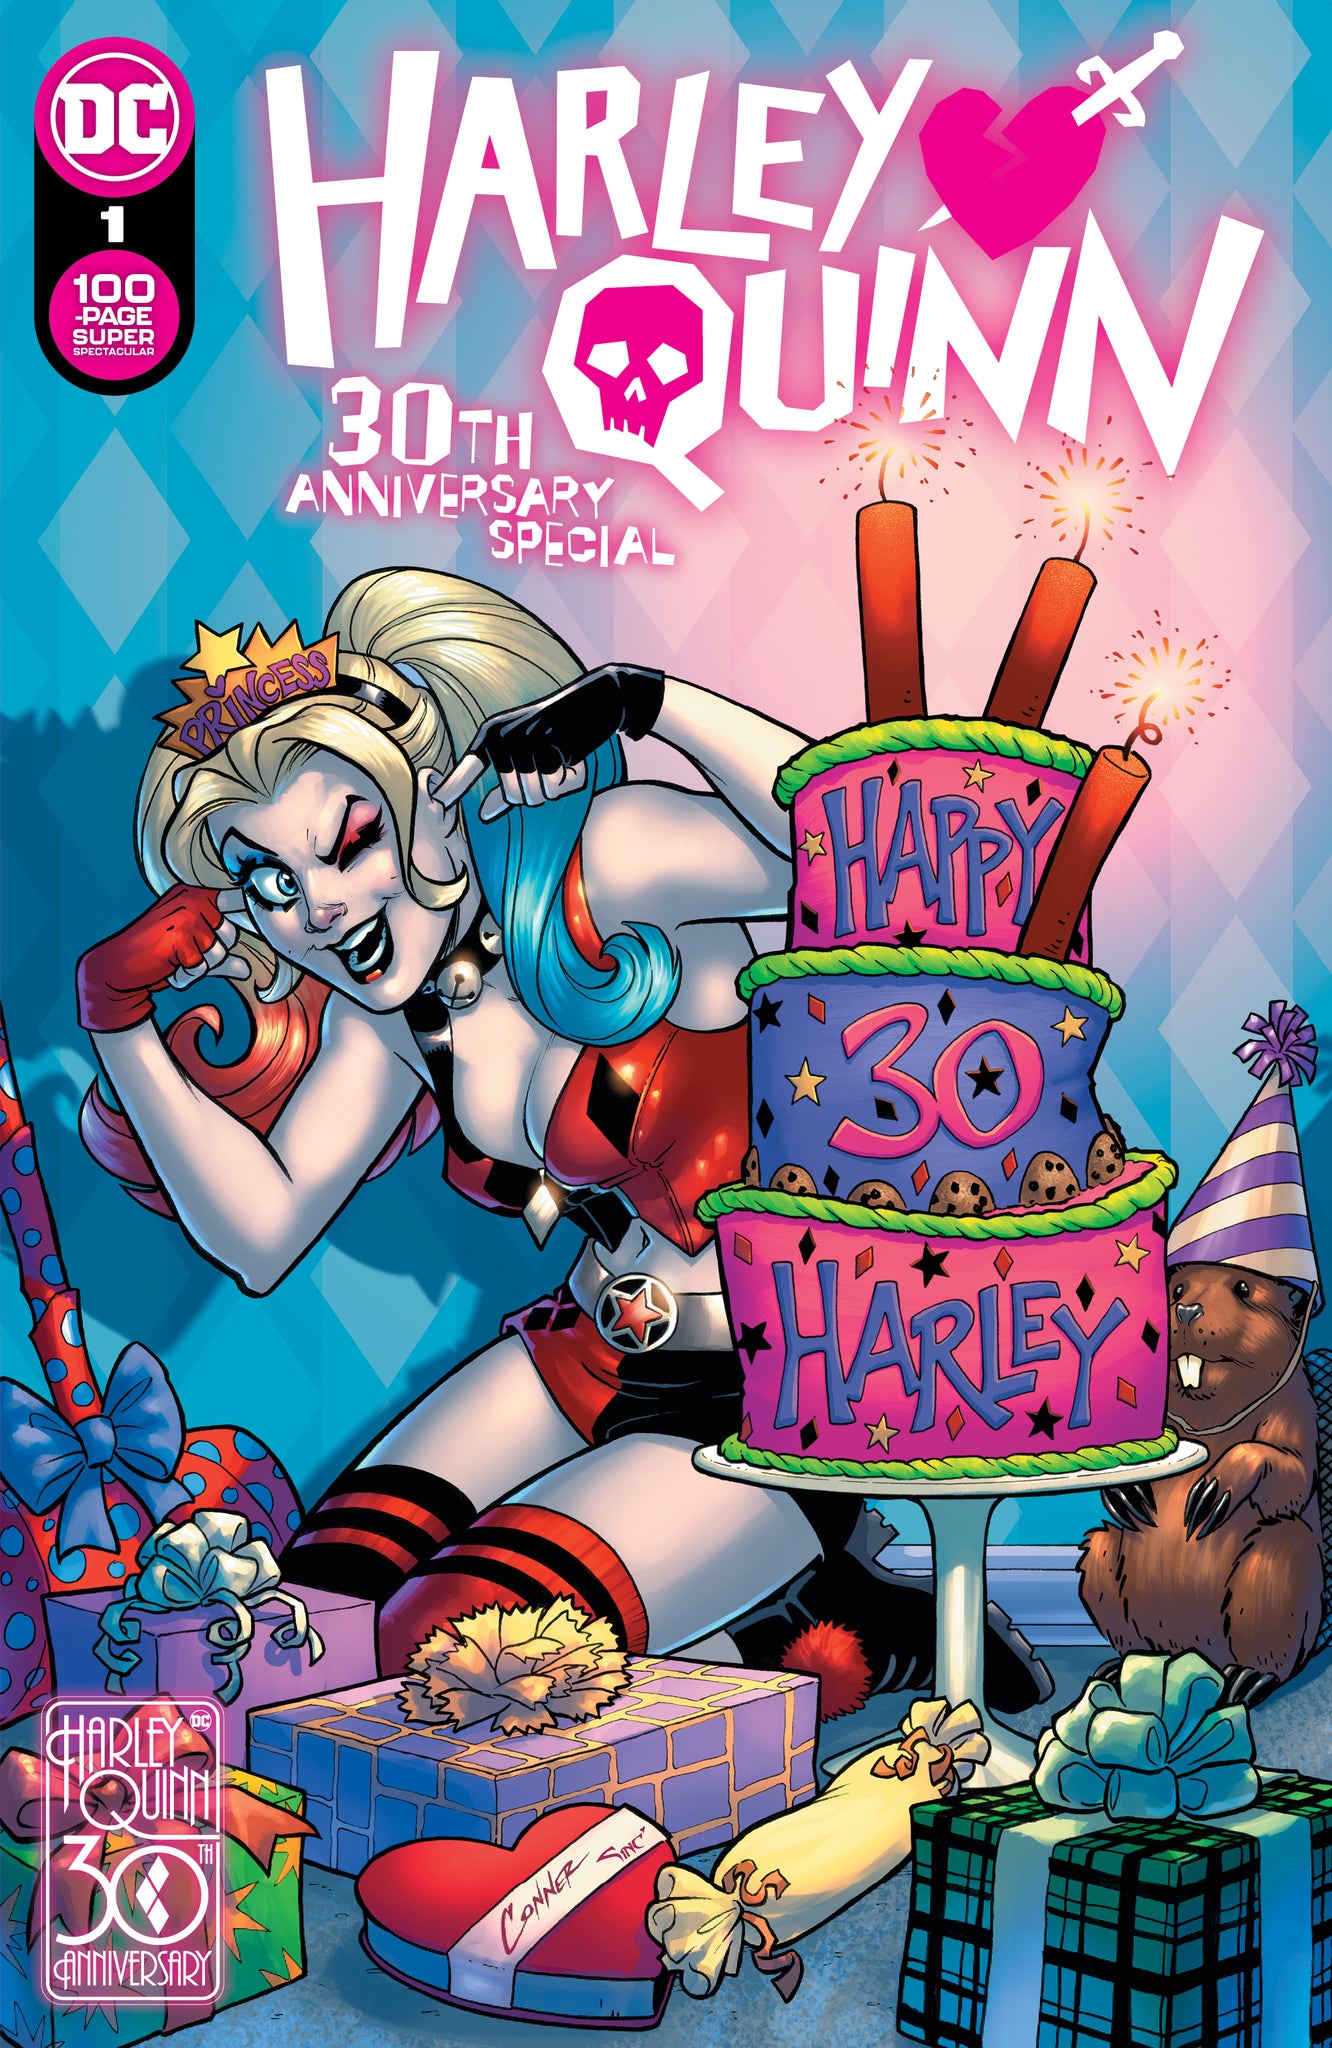 HARLEY QUINN 30TH ANNIVERSARY SPECIAL #1 (ONE SHOT)